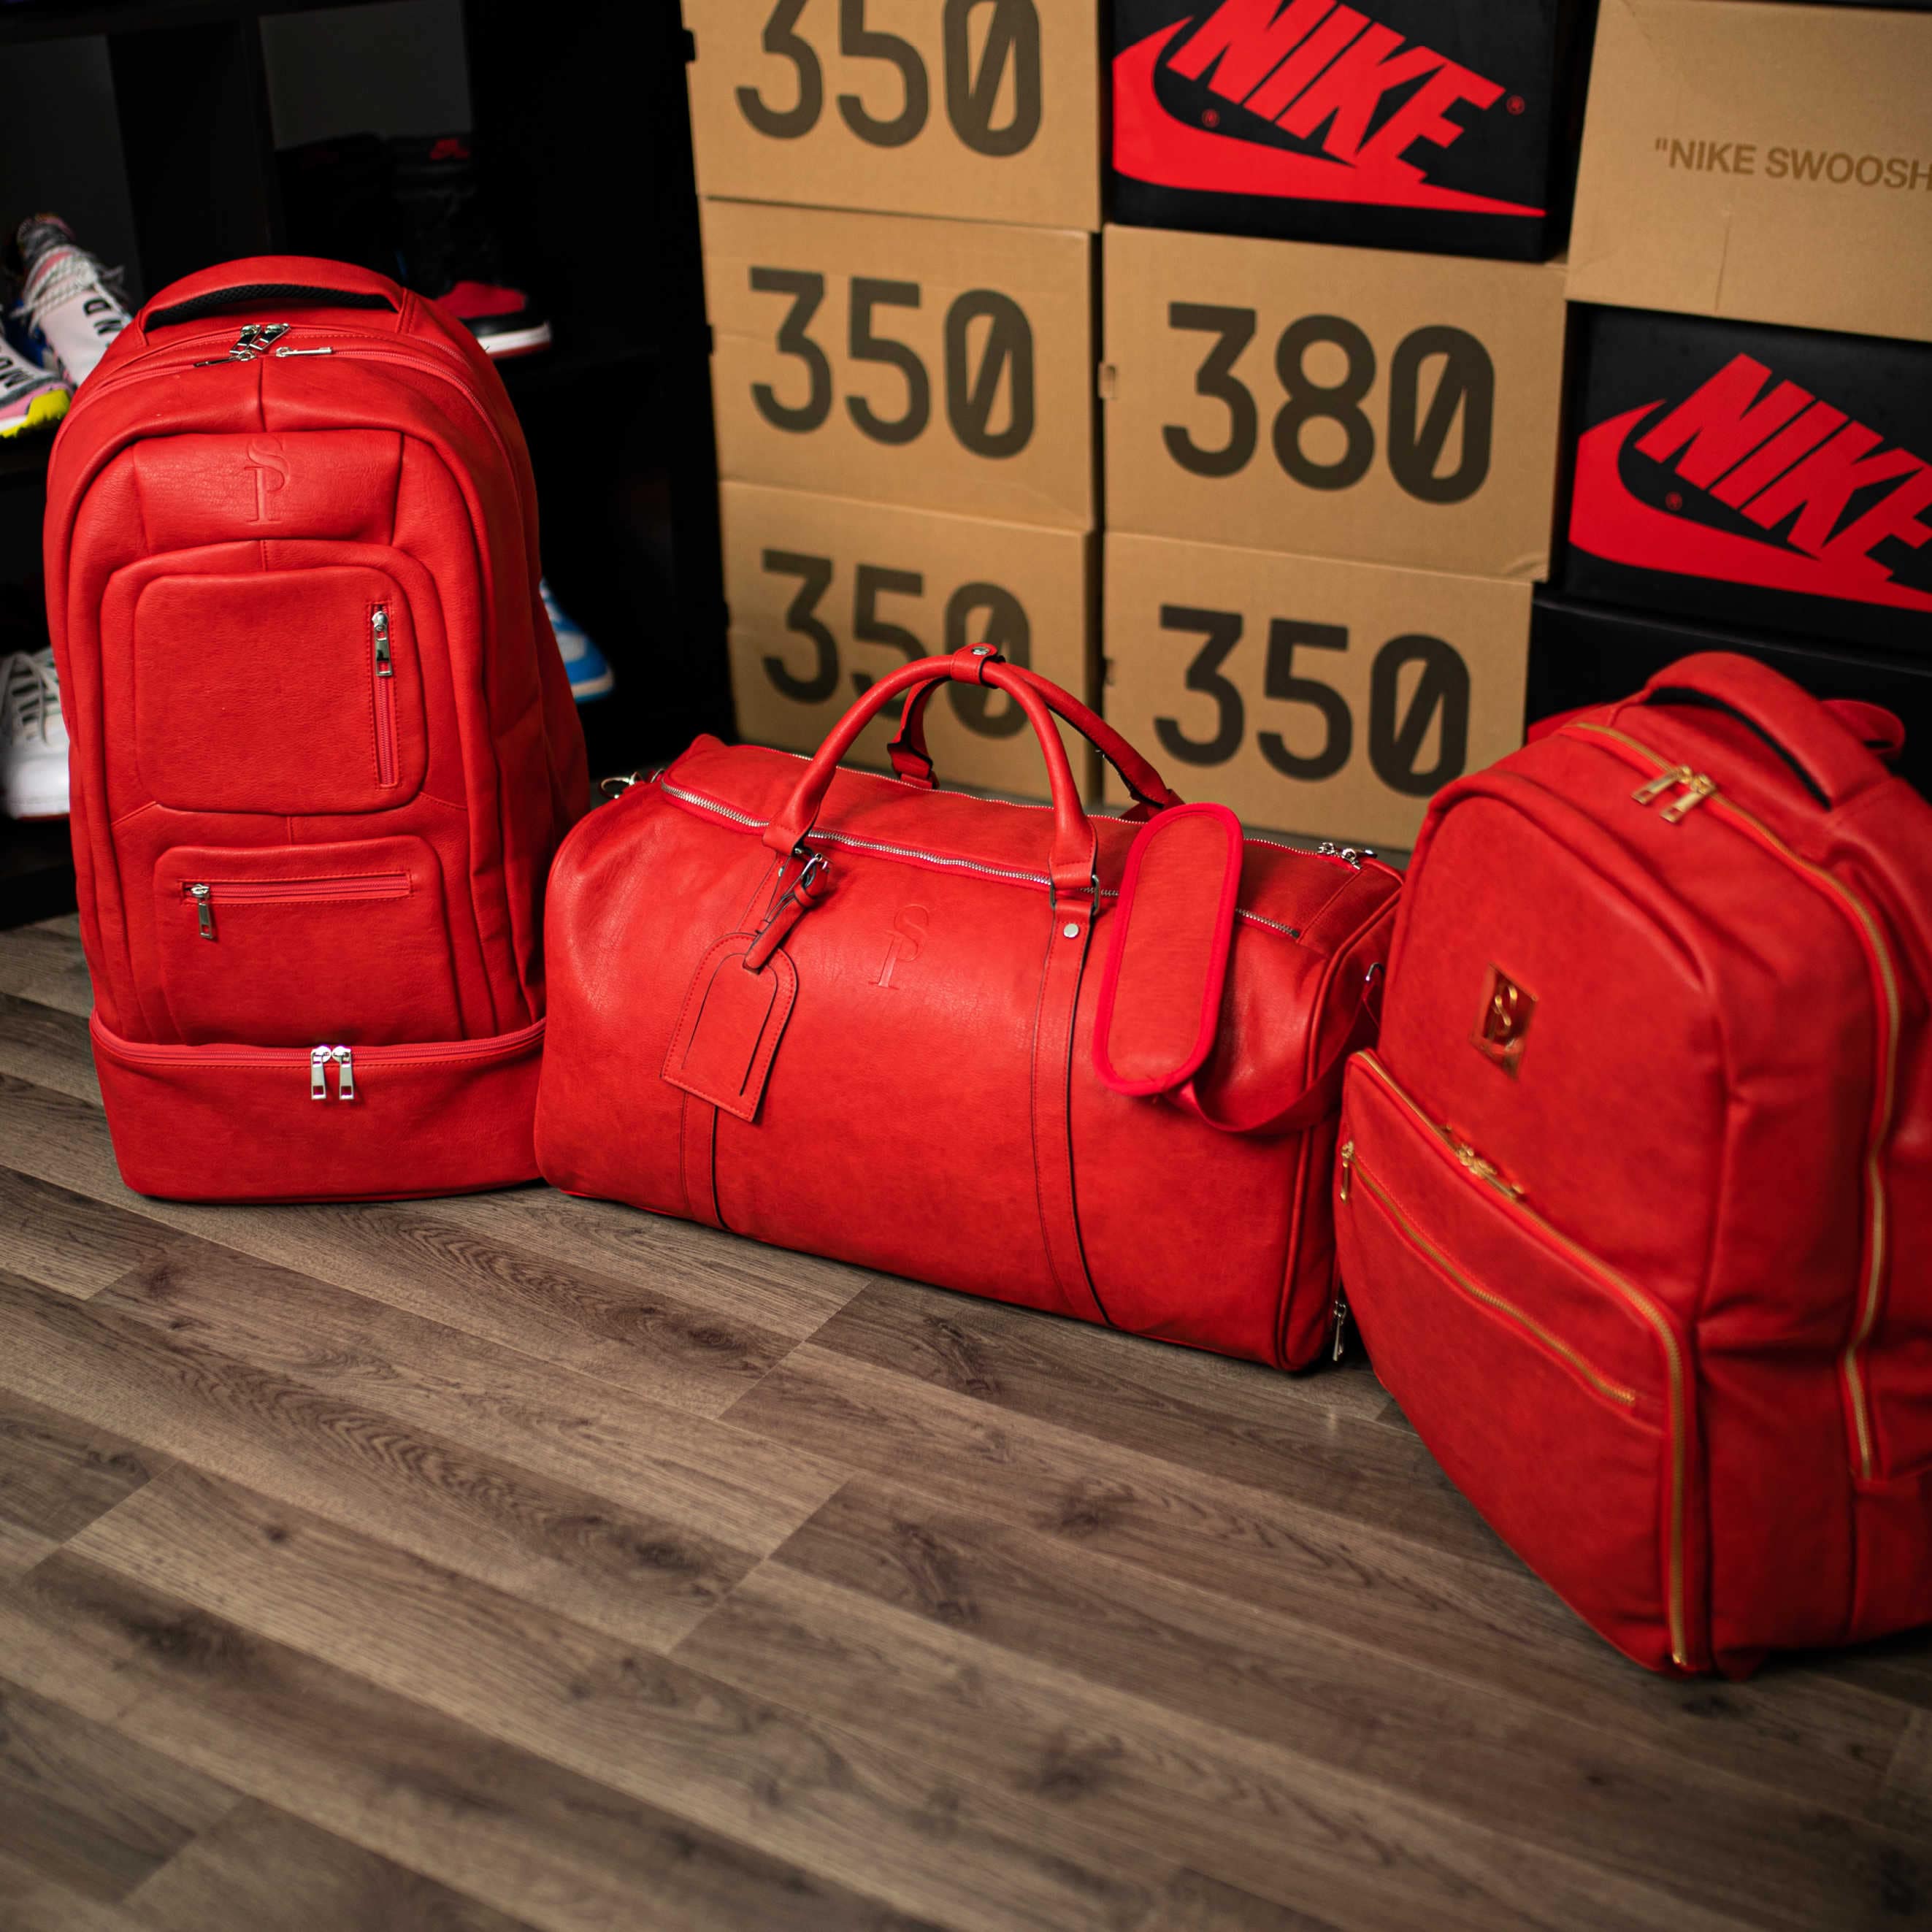 Red Tumbled Leather 3 Bag Set - Sole Premise